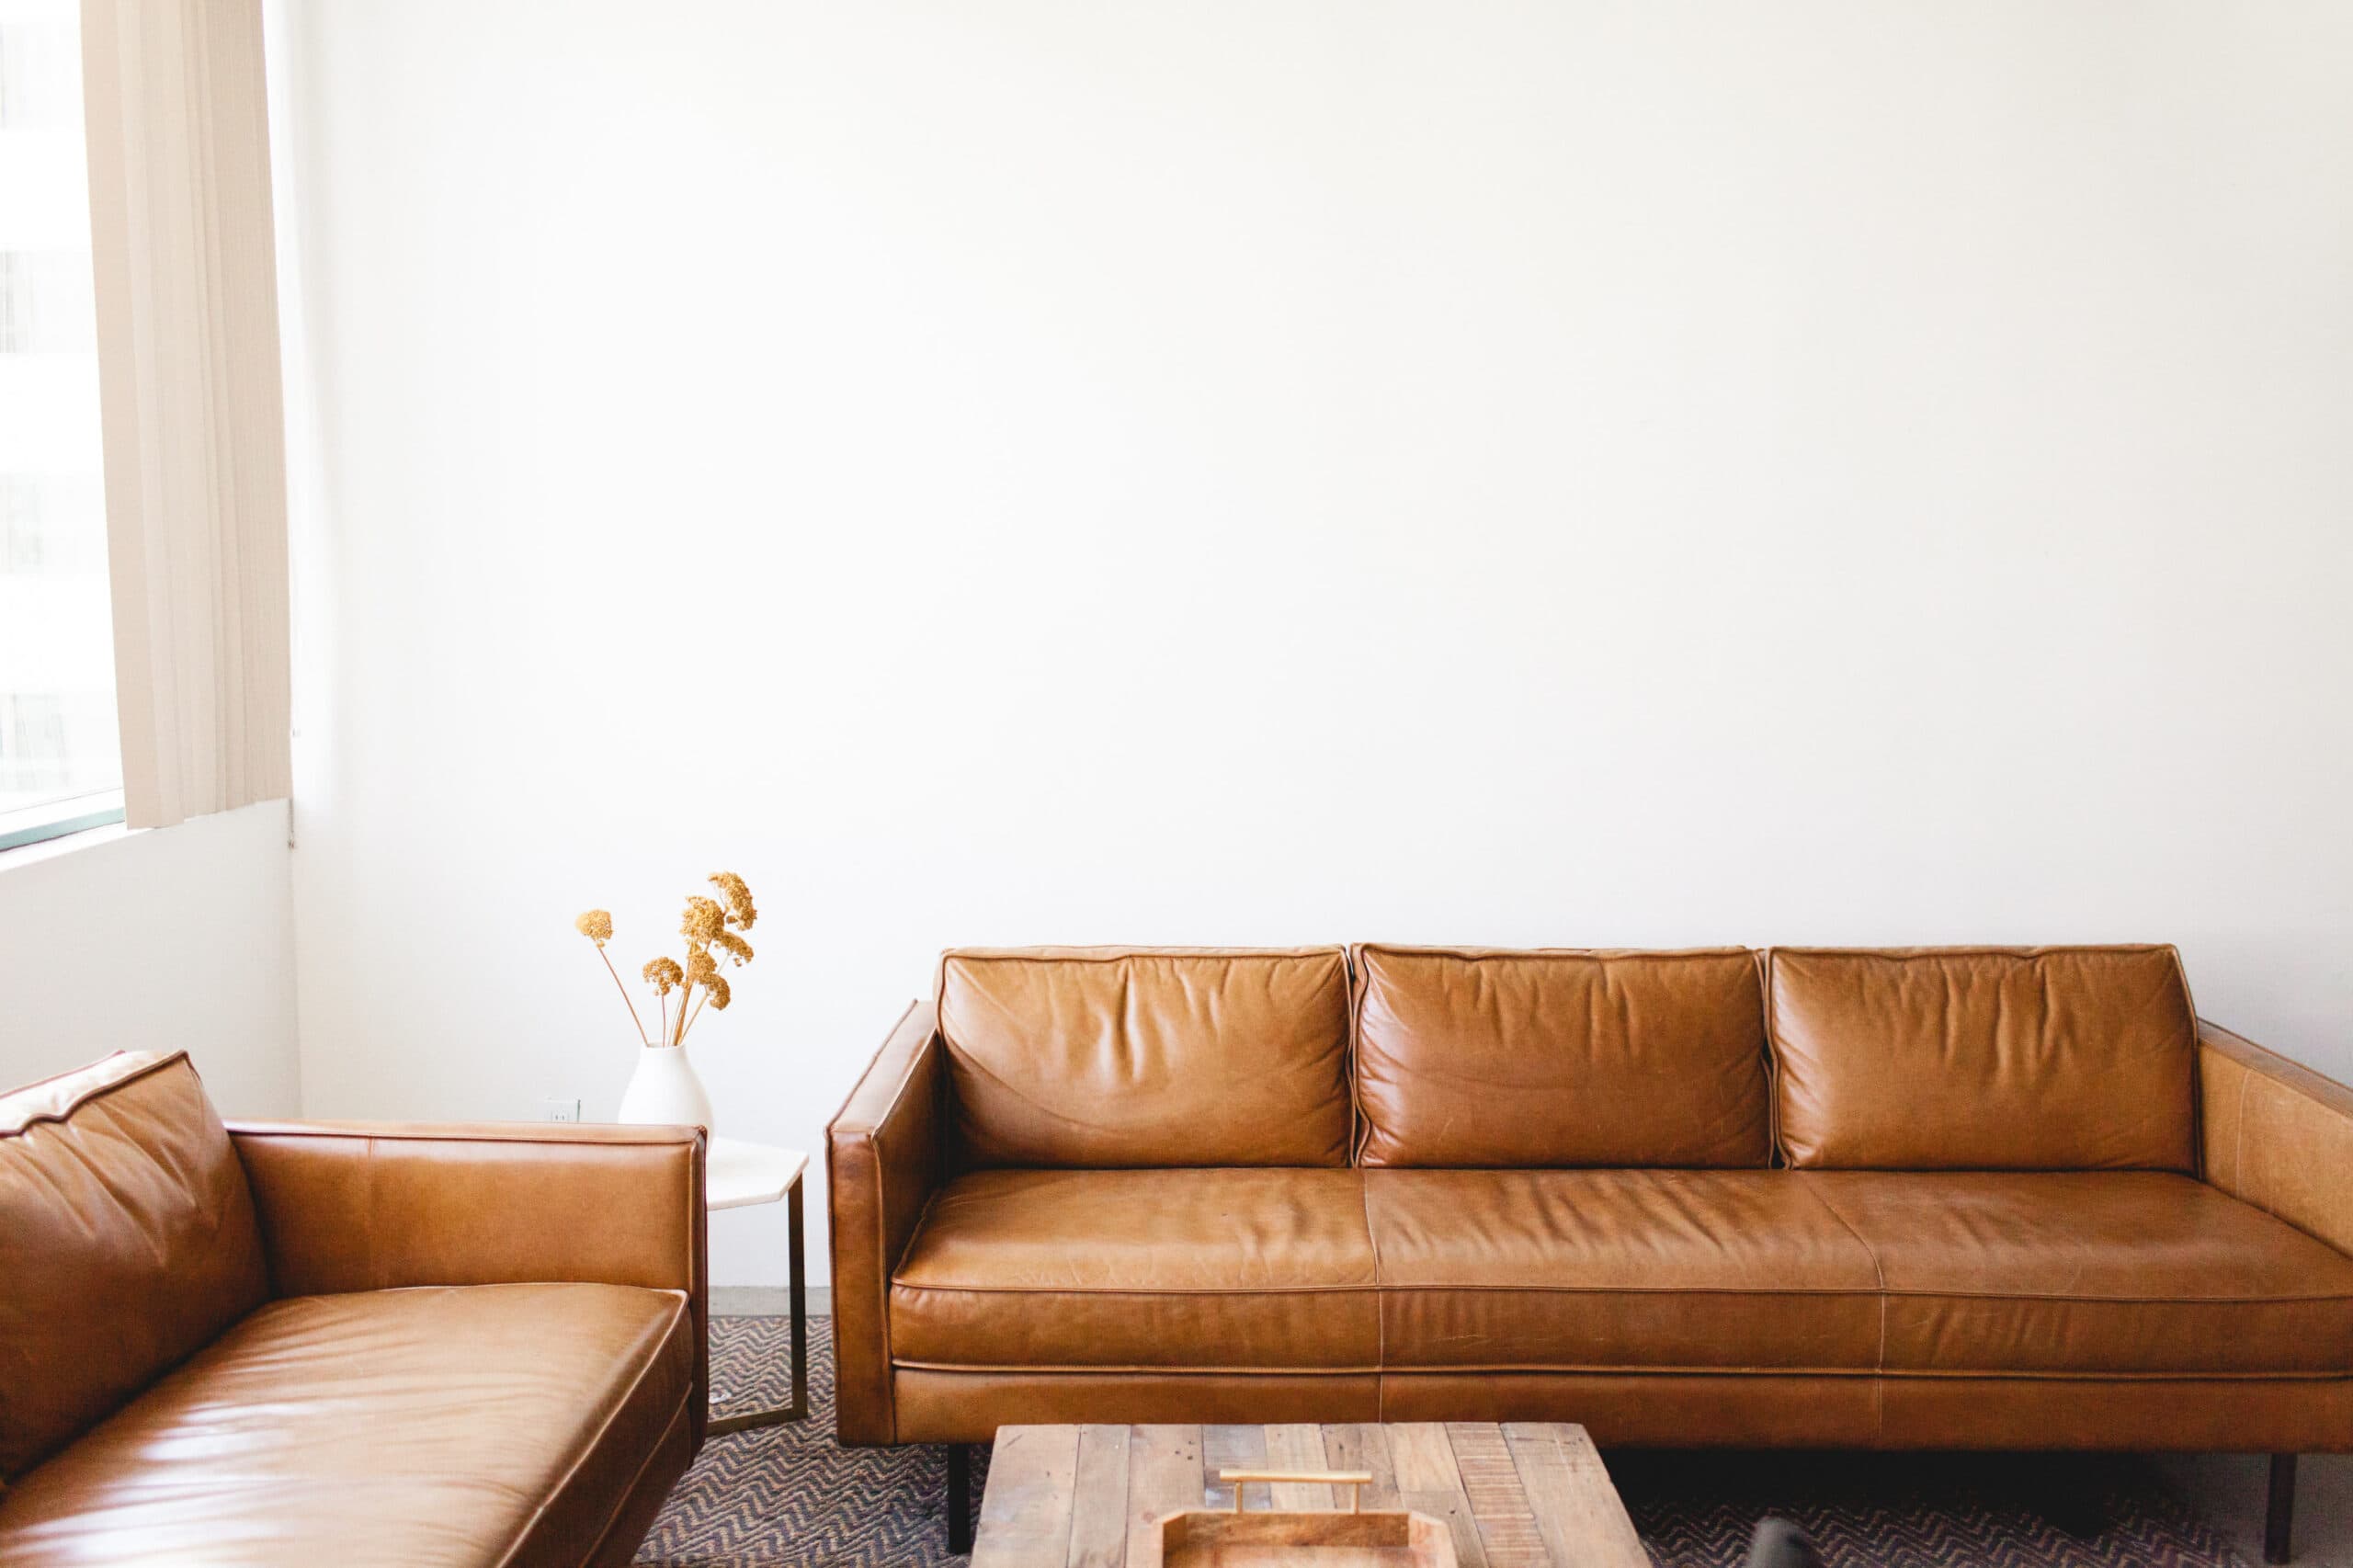 Mid-Wilshire Los Angeles studio space with brown leather couches